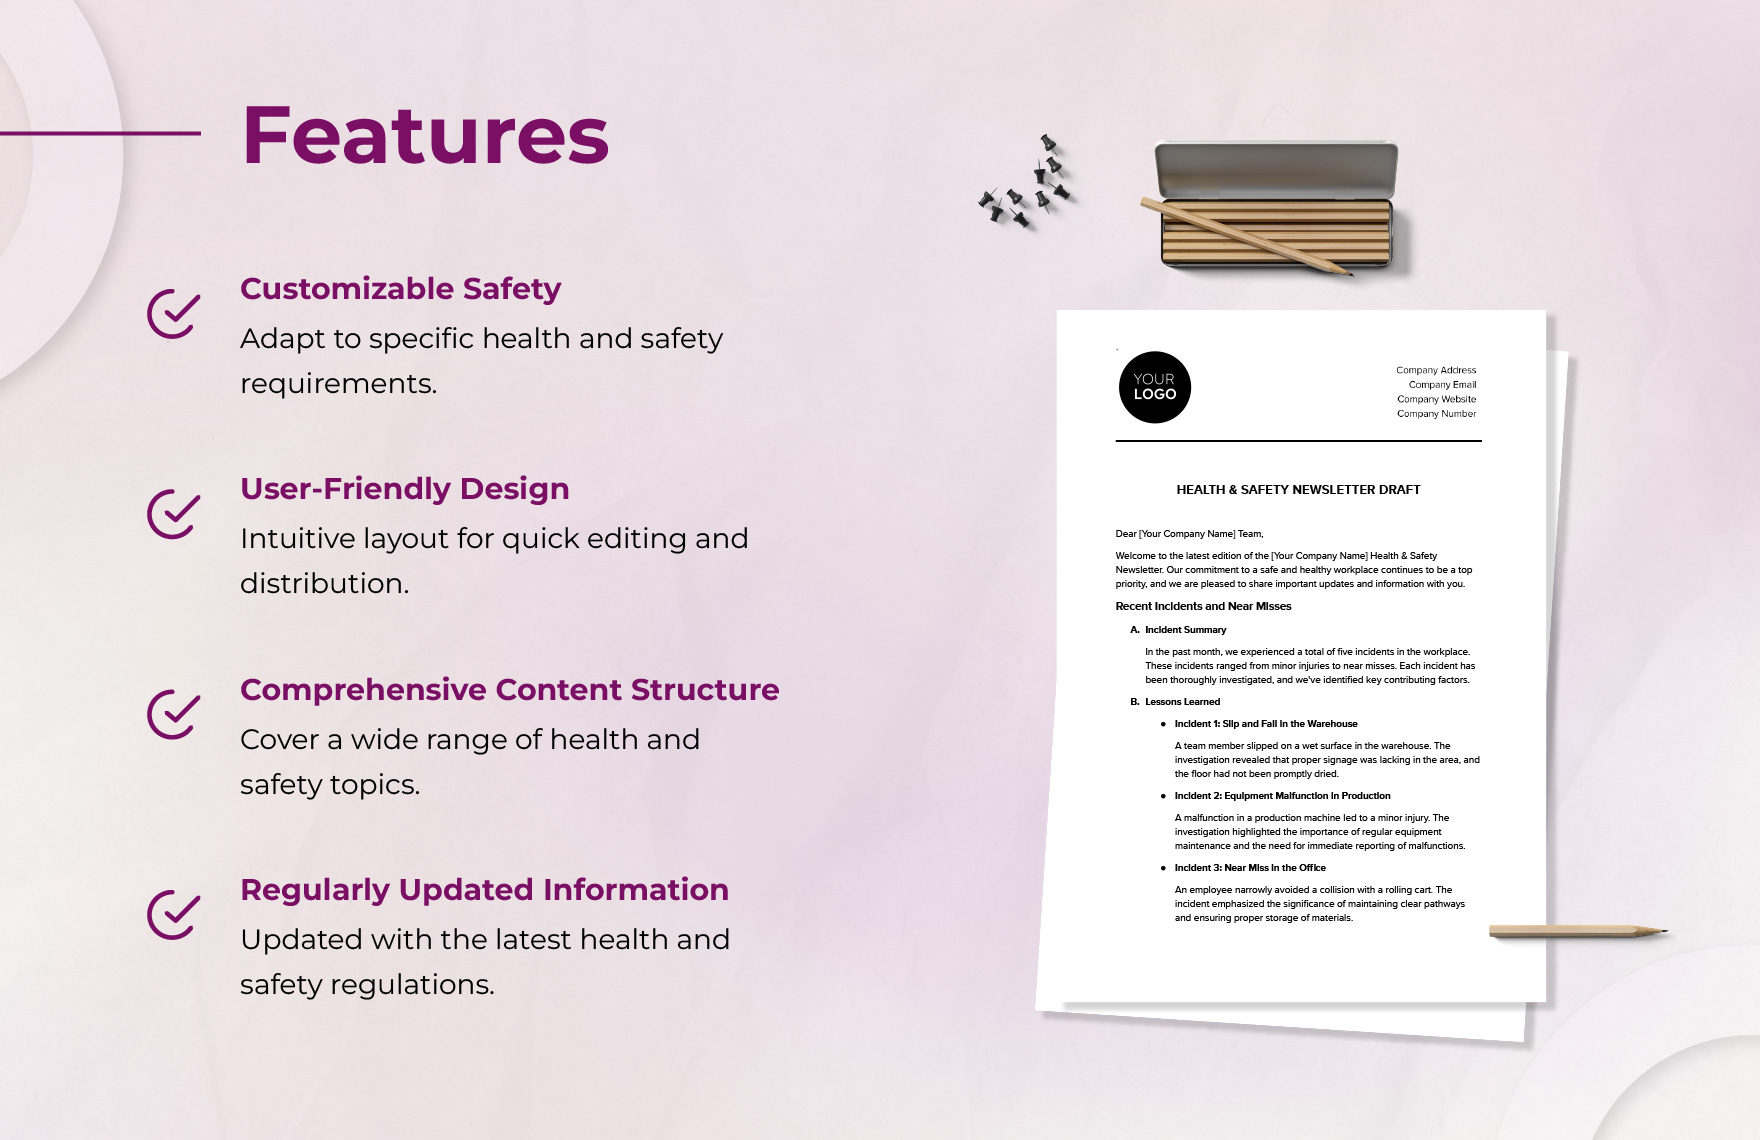 Health & Safety Newsletter Draft Template